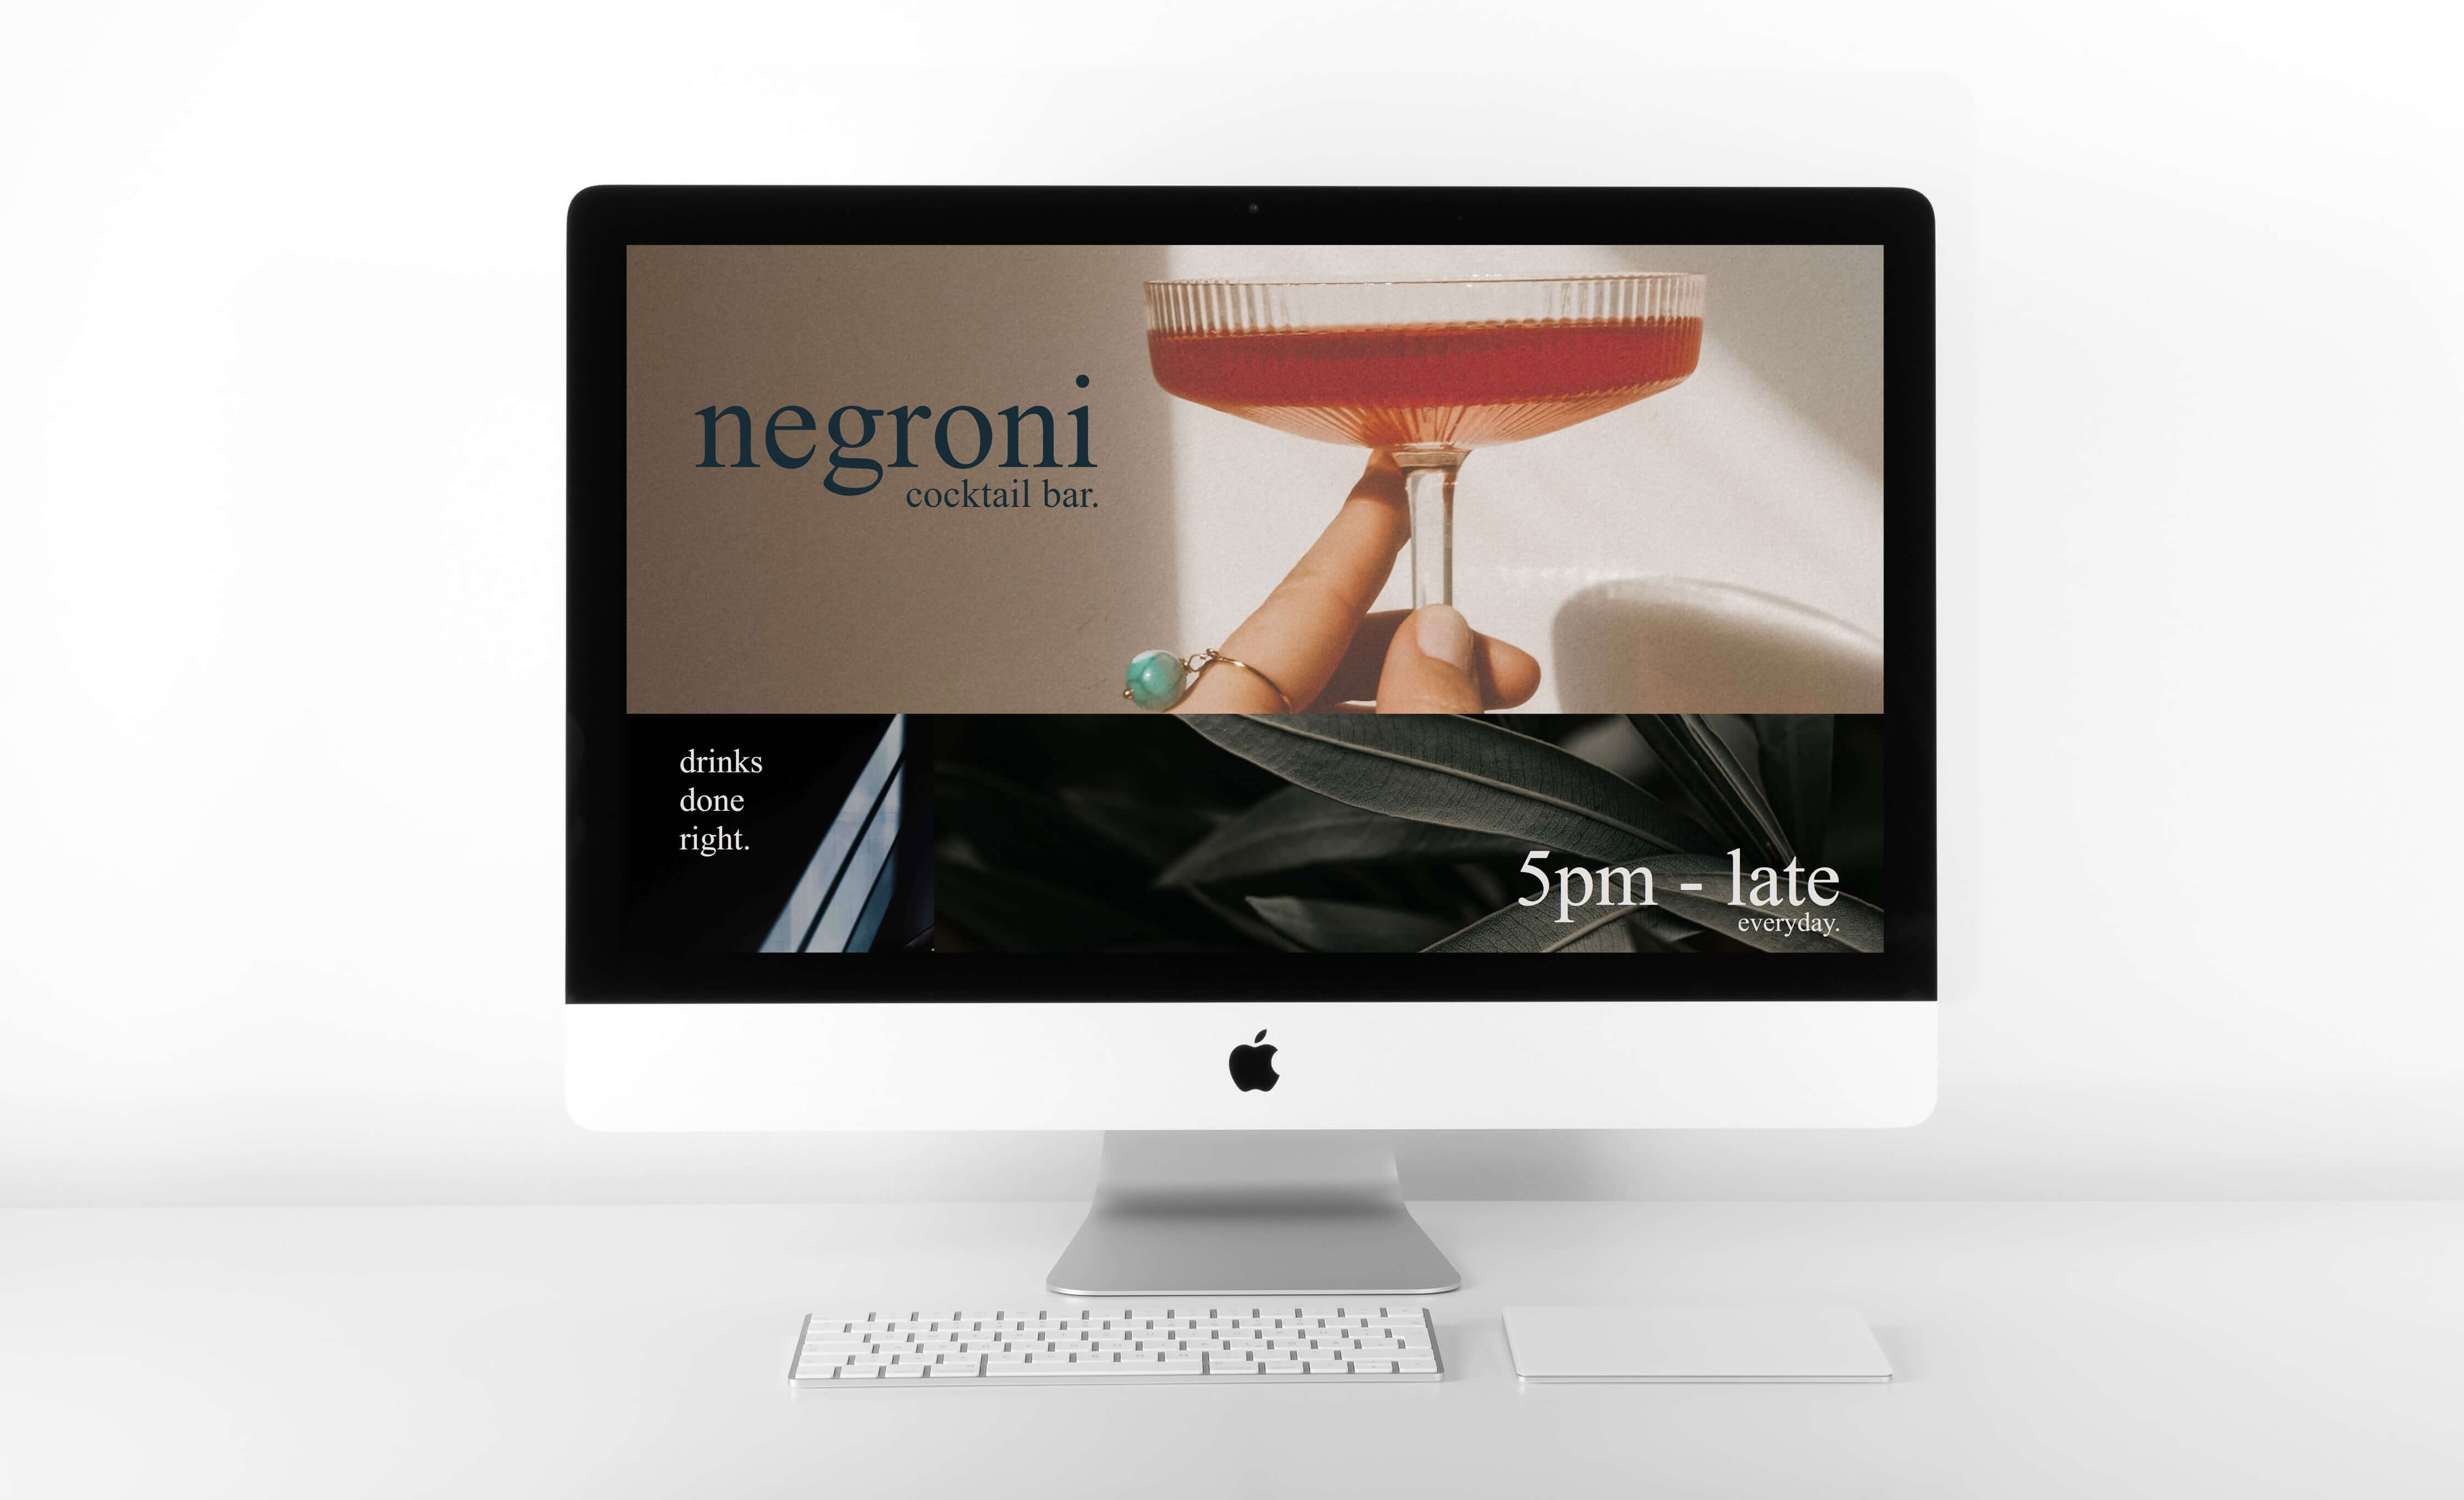 Imac computer displaying Negroni Cocktail bar website. Photo orginally by Quaritsch Photography